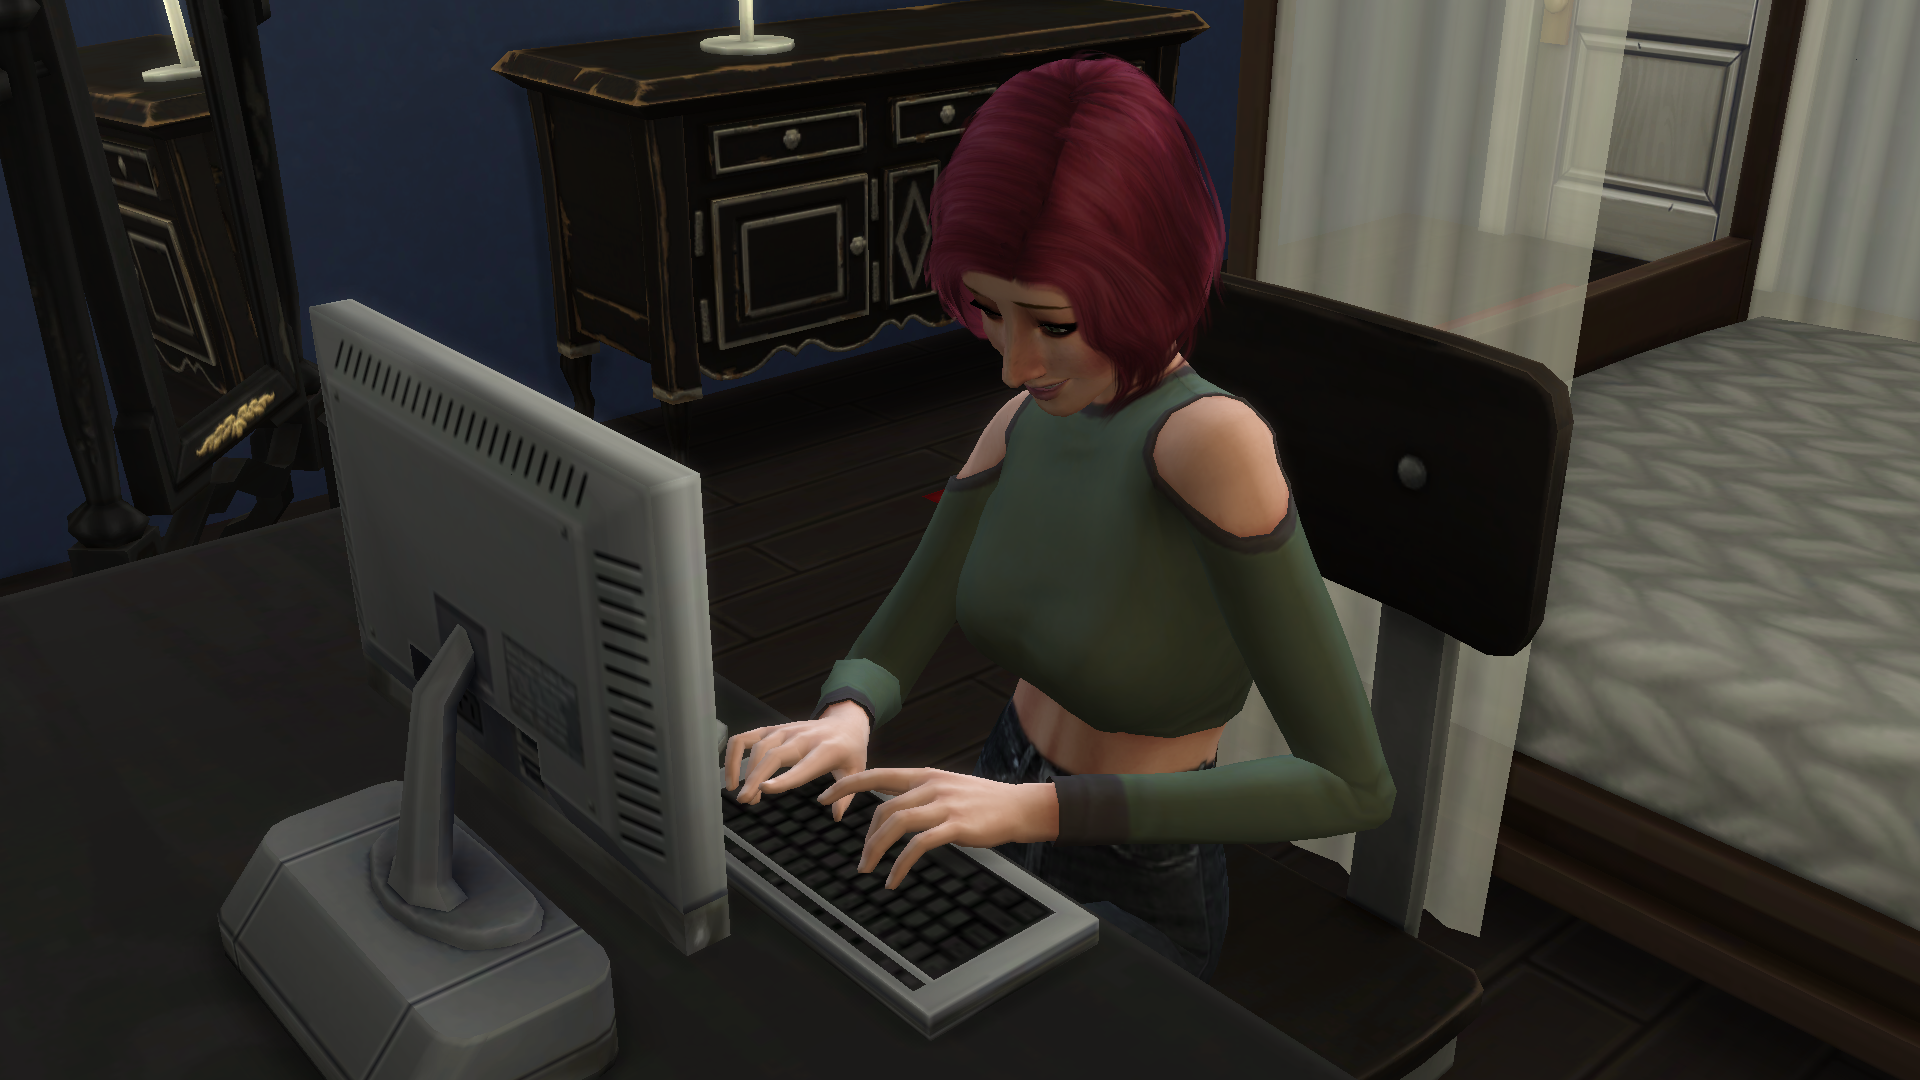 Hot Complications Sims Story Page 4 The Sims 4 General Discussion 